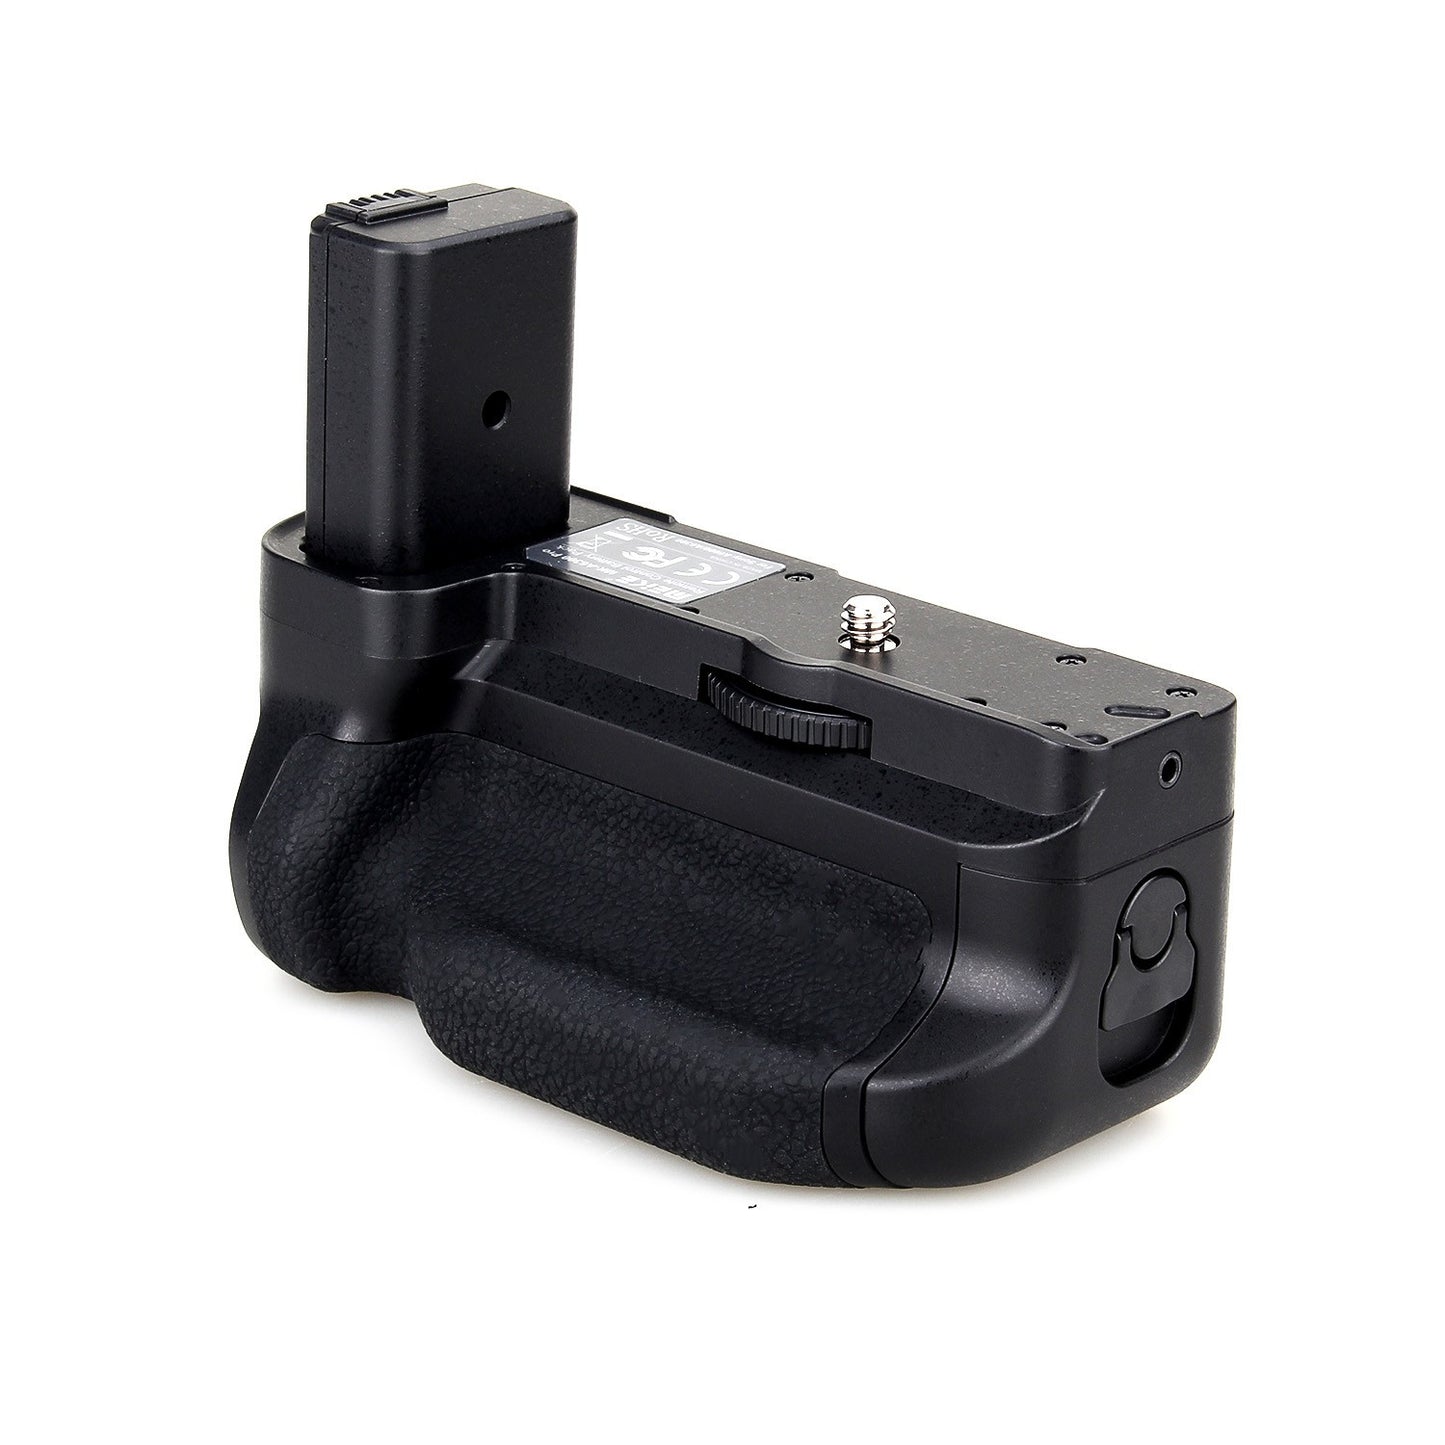 Meike MK-A6300 Vertical Battery Grip and Pack Holder For Sony A6300 ILCE-6300 camera NP-FW50  